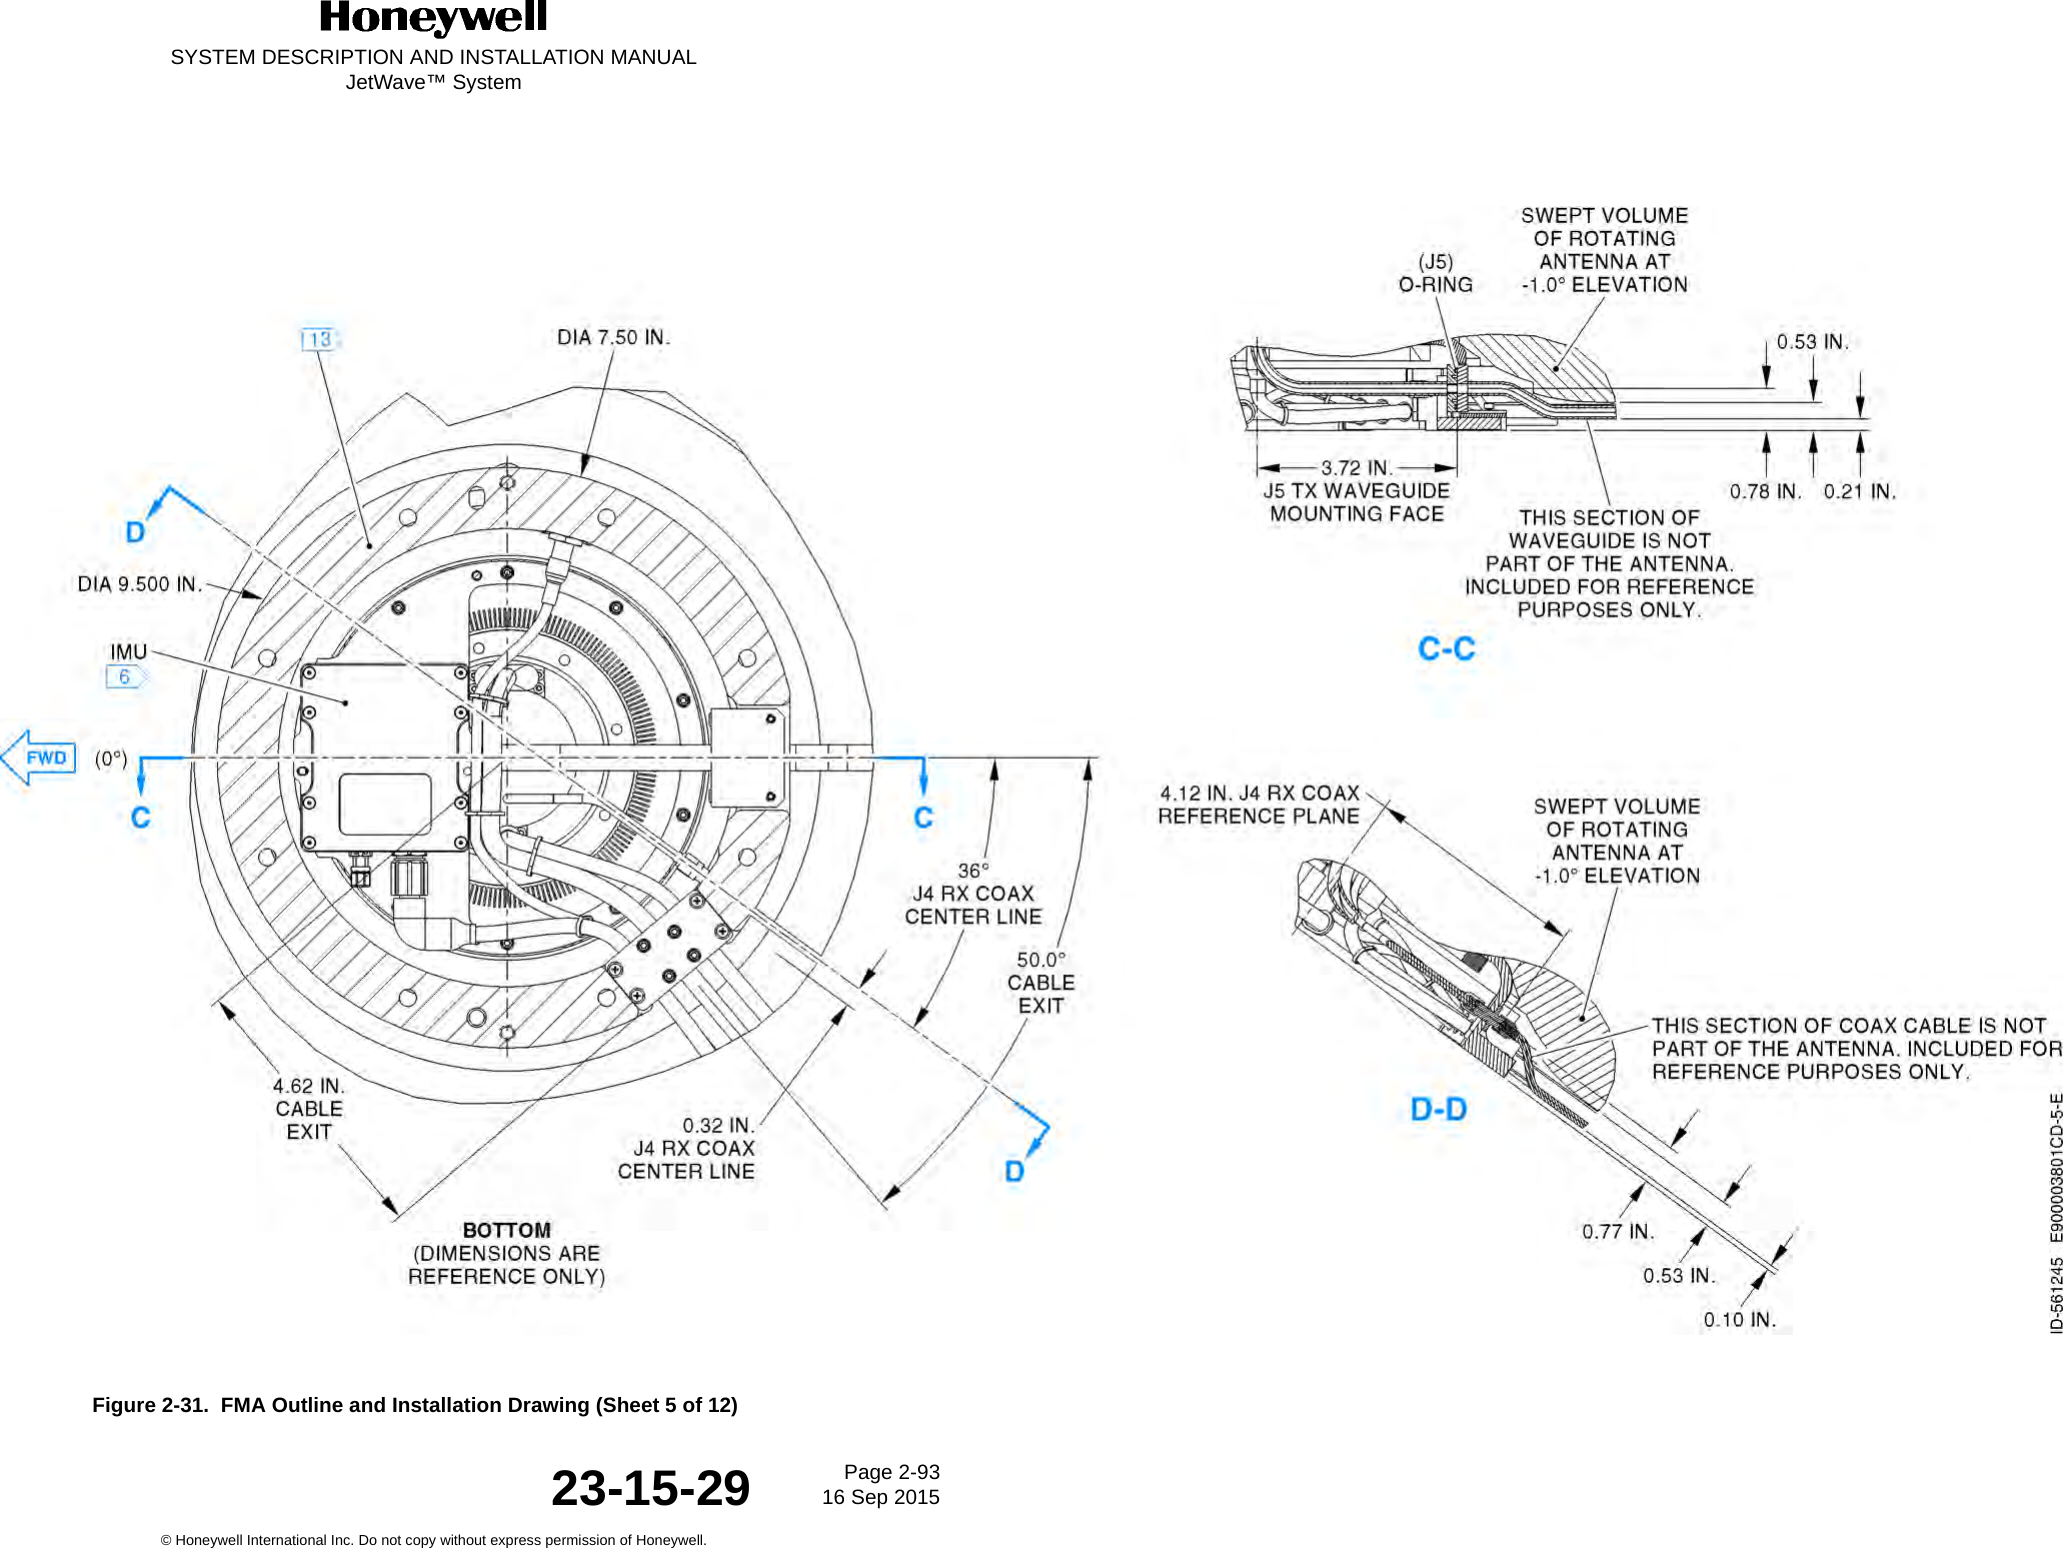 SYSTEM DESCRIPTION AND INSTALLATION MANUALJetWave™ SystemPage 2-93 16 Sep 2015© Honeywell International Inc. Do not copy without express permission of Honeywell.23-15-29Figure 2-31.  FMA Outline and Installation Drawing (Sheet 5 of 12)